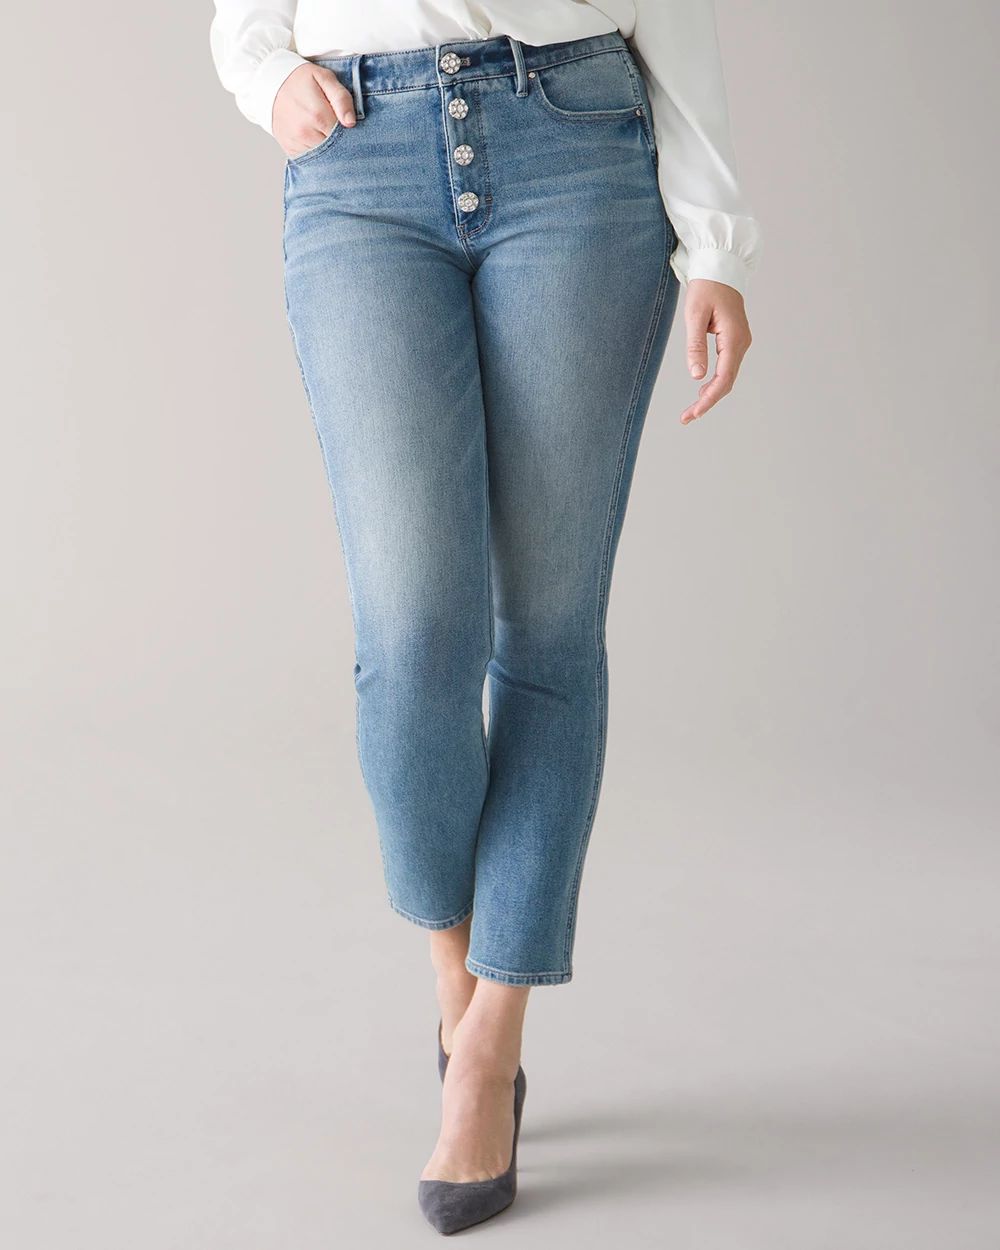 Curvy-Fit High-Rise Sculpt Jewel Button Straight Ankle Jeans click to view larger image.